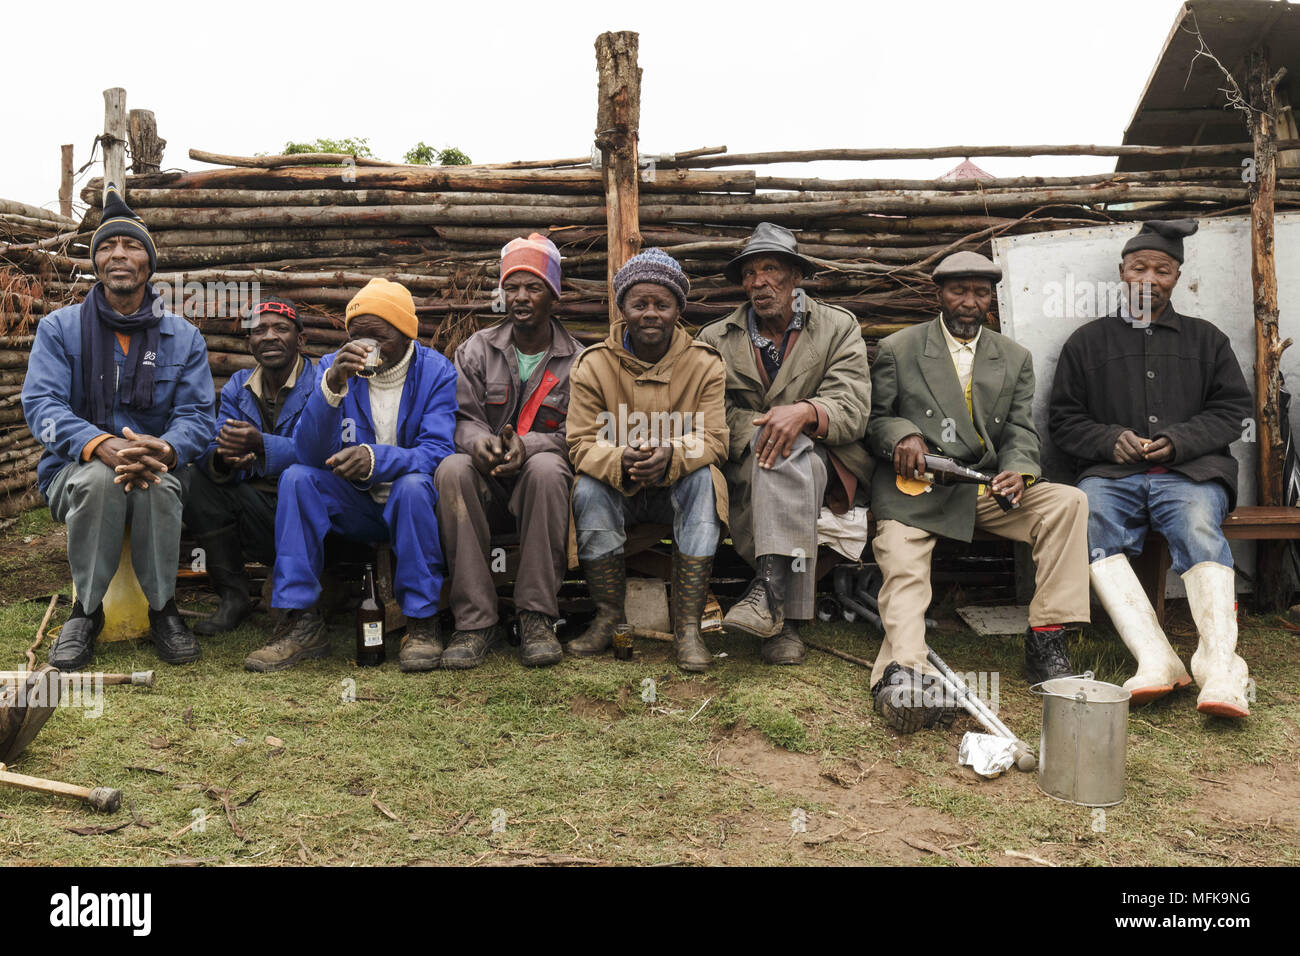 December 4, 2017 - Matatiele, Eastern Cape, South Africa - Xhosa men attend an initiation ceremony, sit together and drink a lot of beer. (Credit Image: © Stefan Kleinowitz via ZUMA Wire) Stock Photo